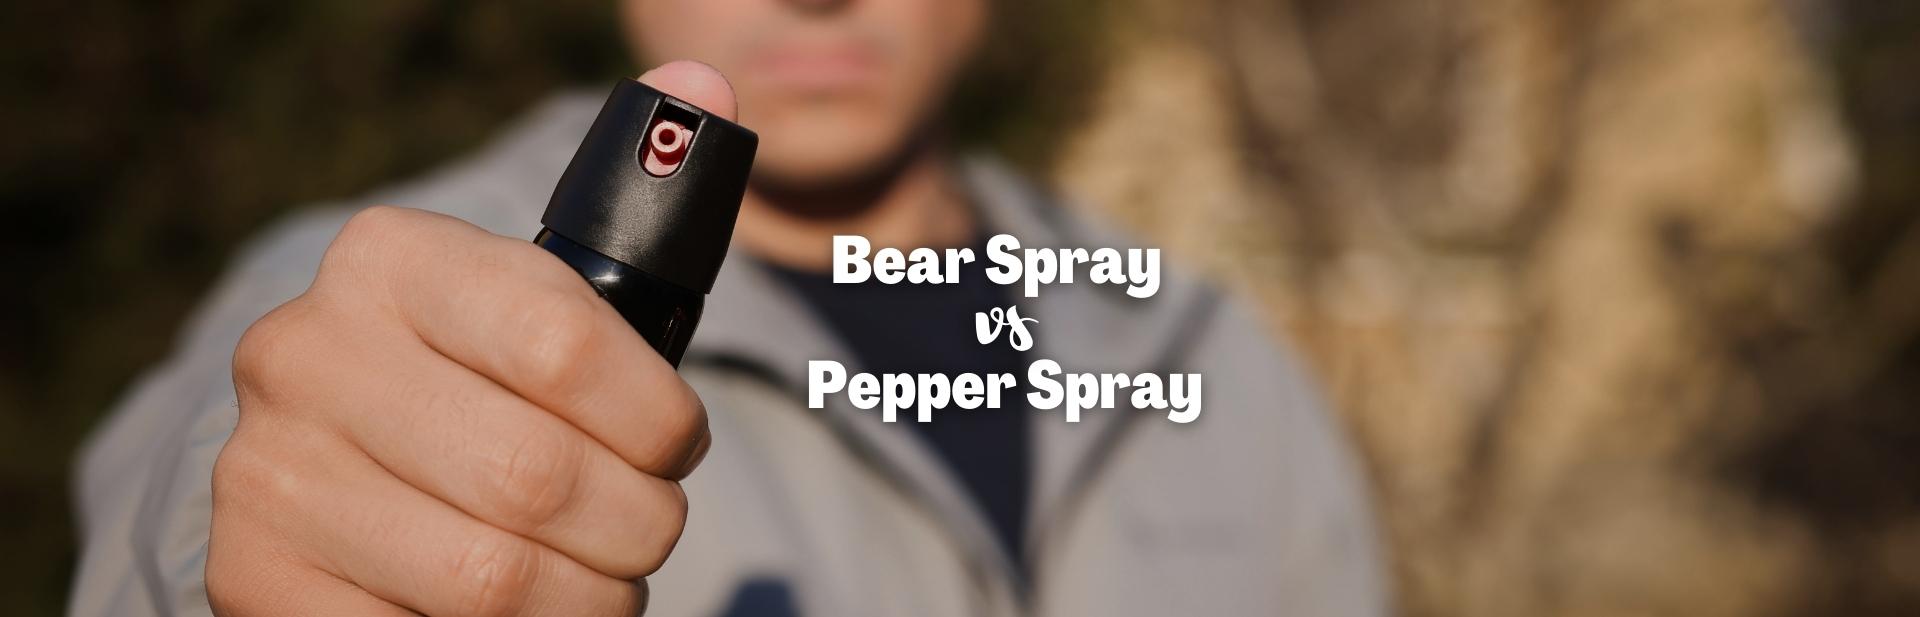 Bear Spray vs Pepper Spray: The Crucial Differences and Their Effectiveness